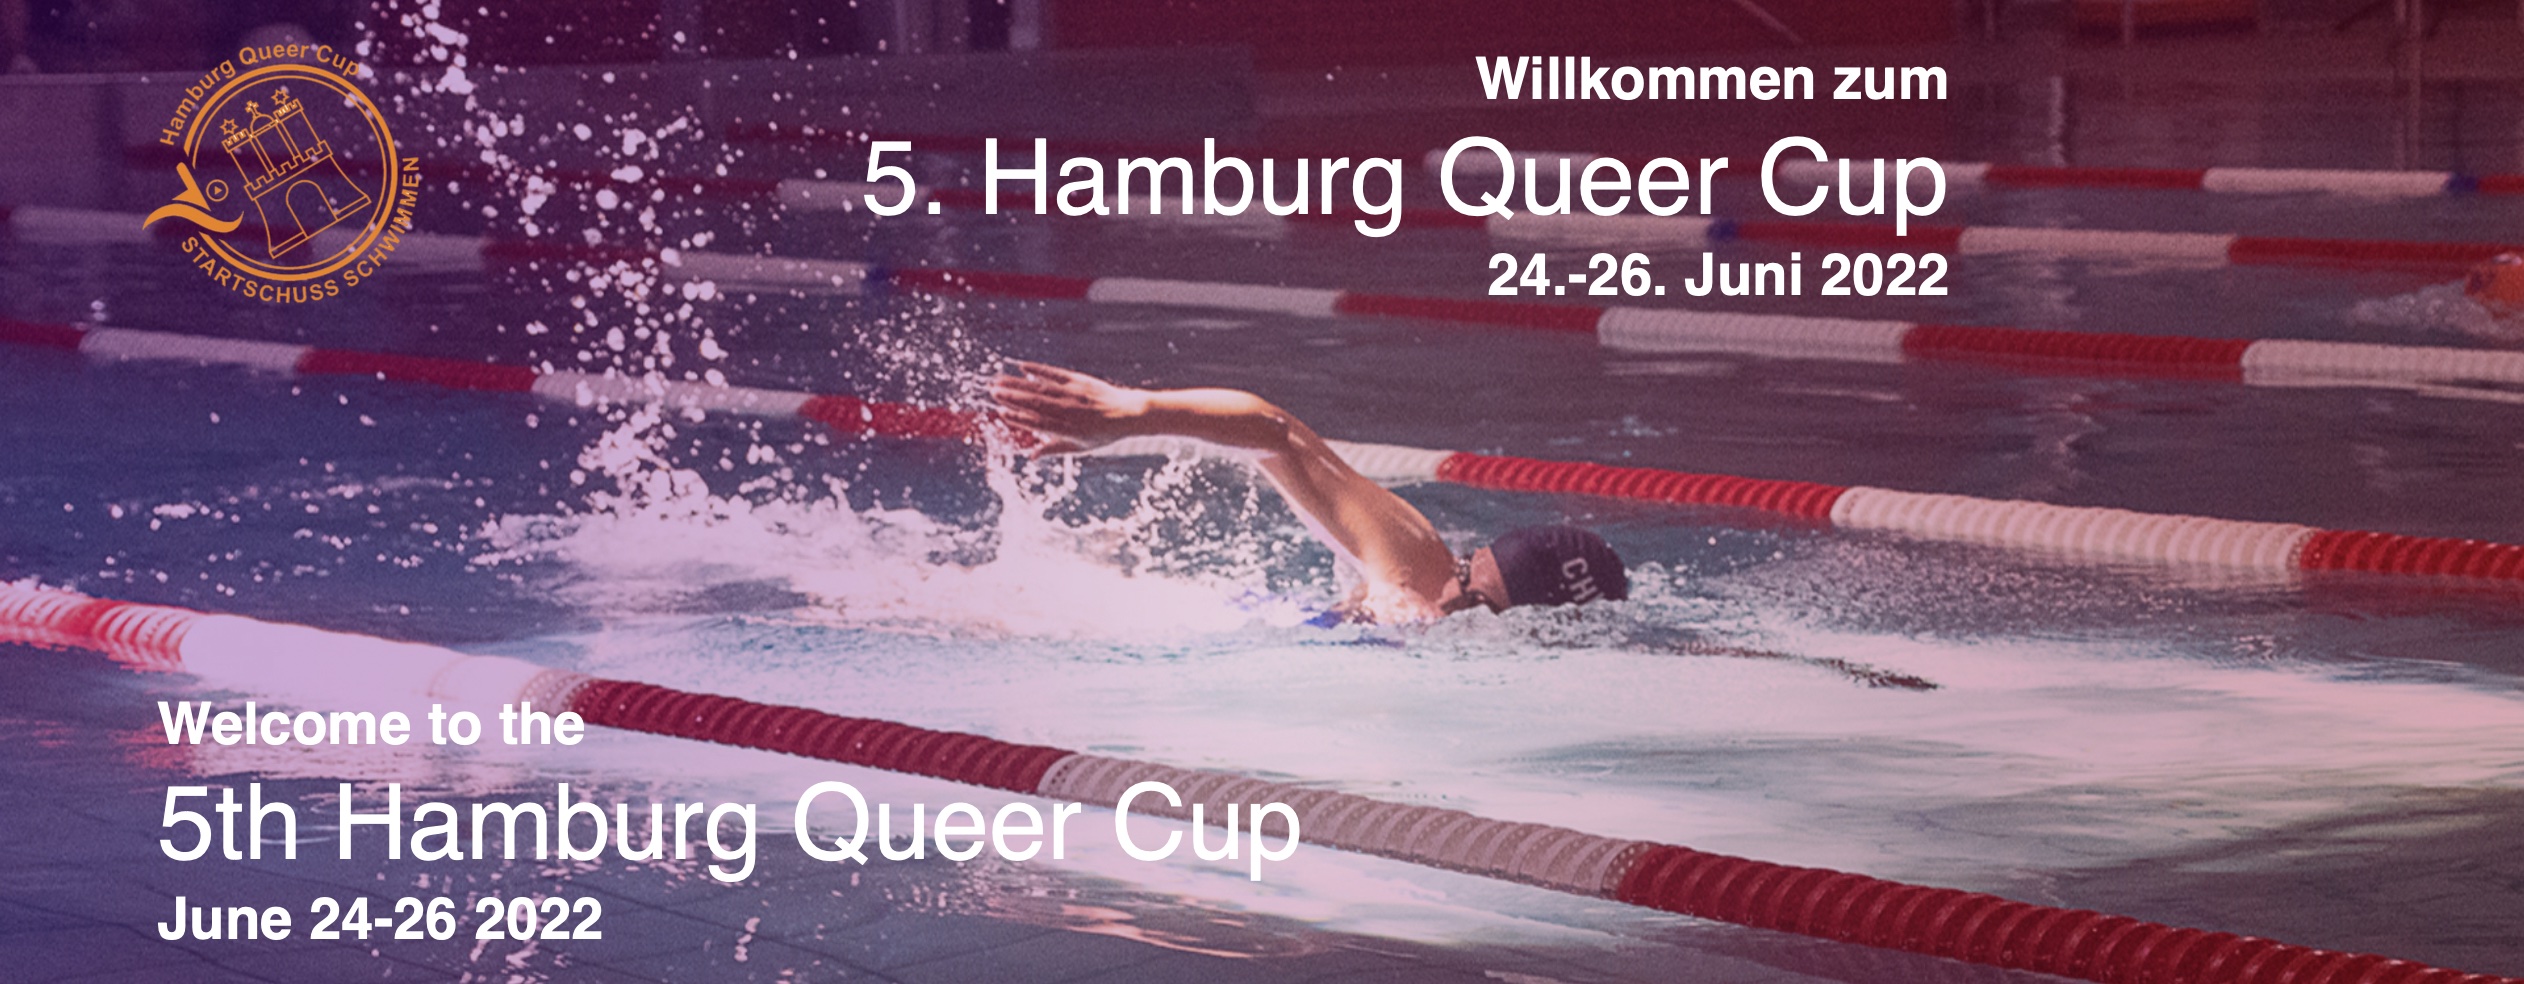 5th Hamburg Queer Cup